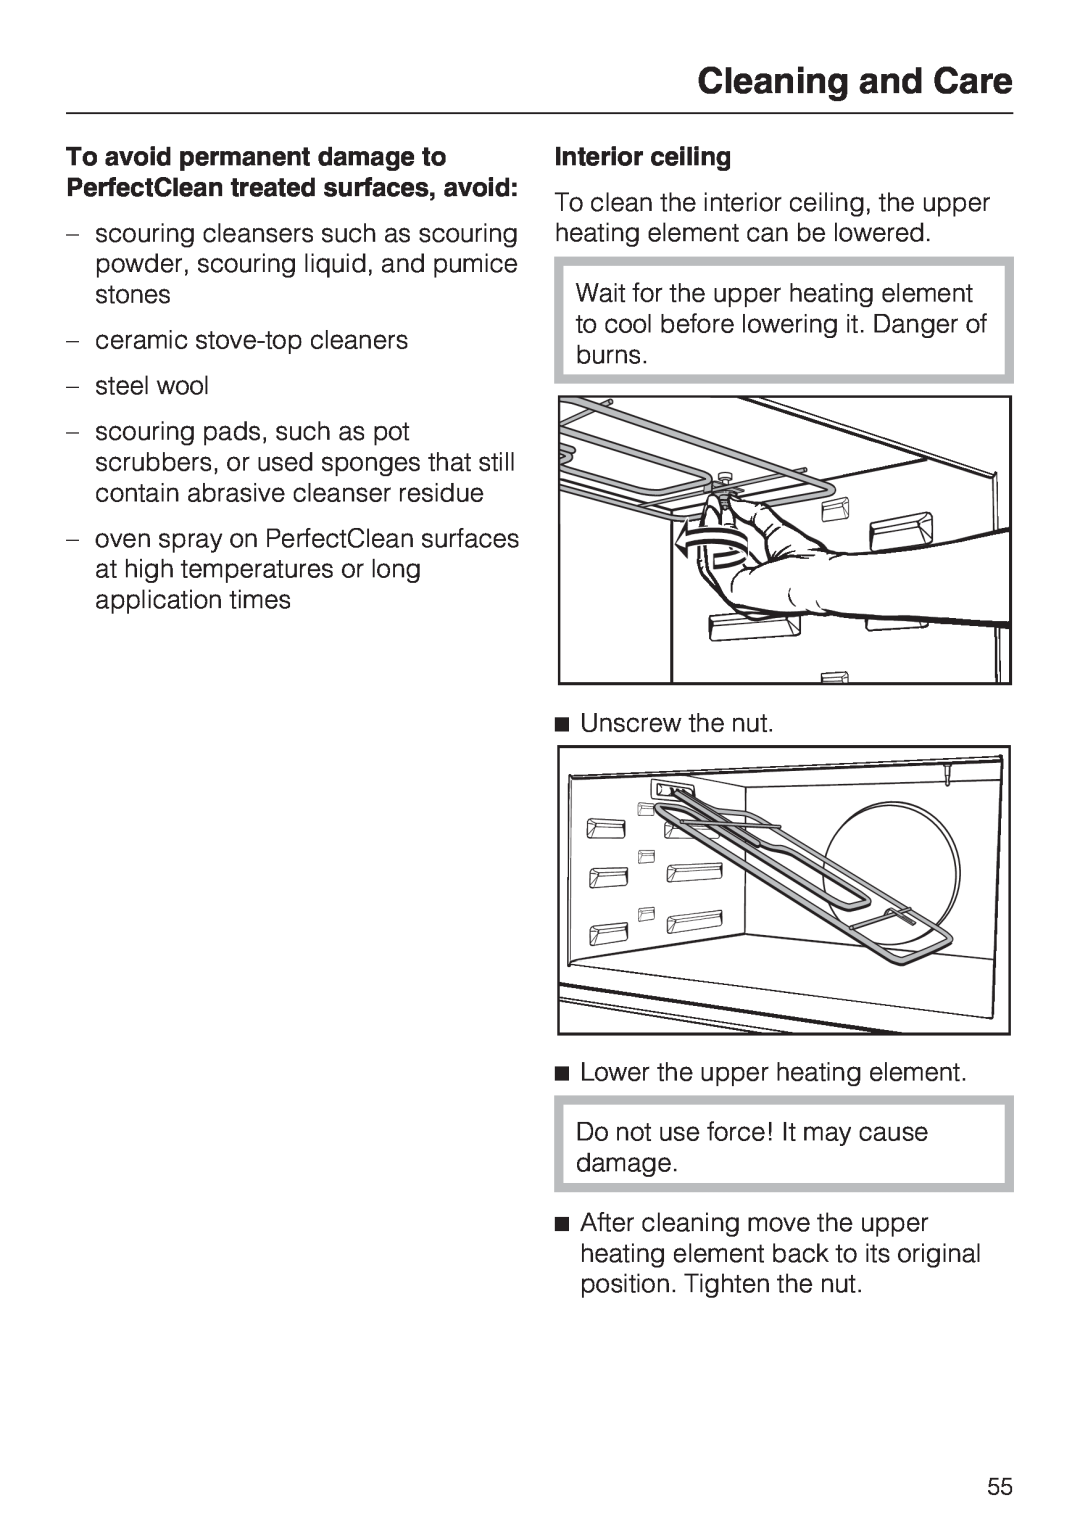 Miele H 4084 BM, H 4086 BM installation instructions Interior ceiling, Cleaning and Care 